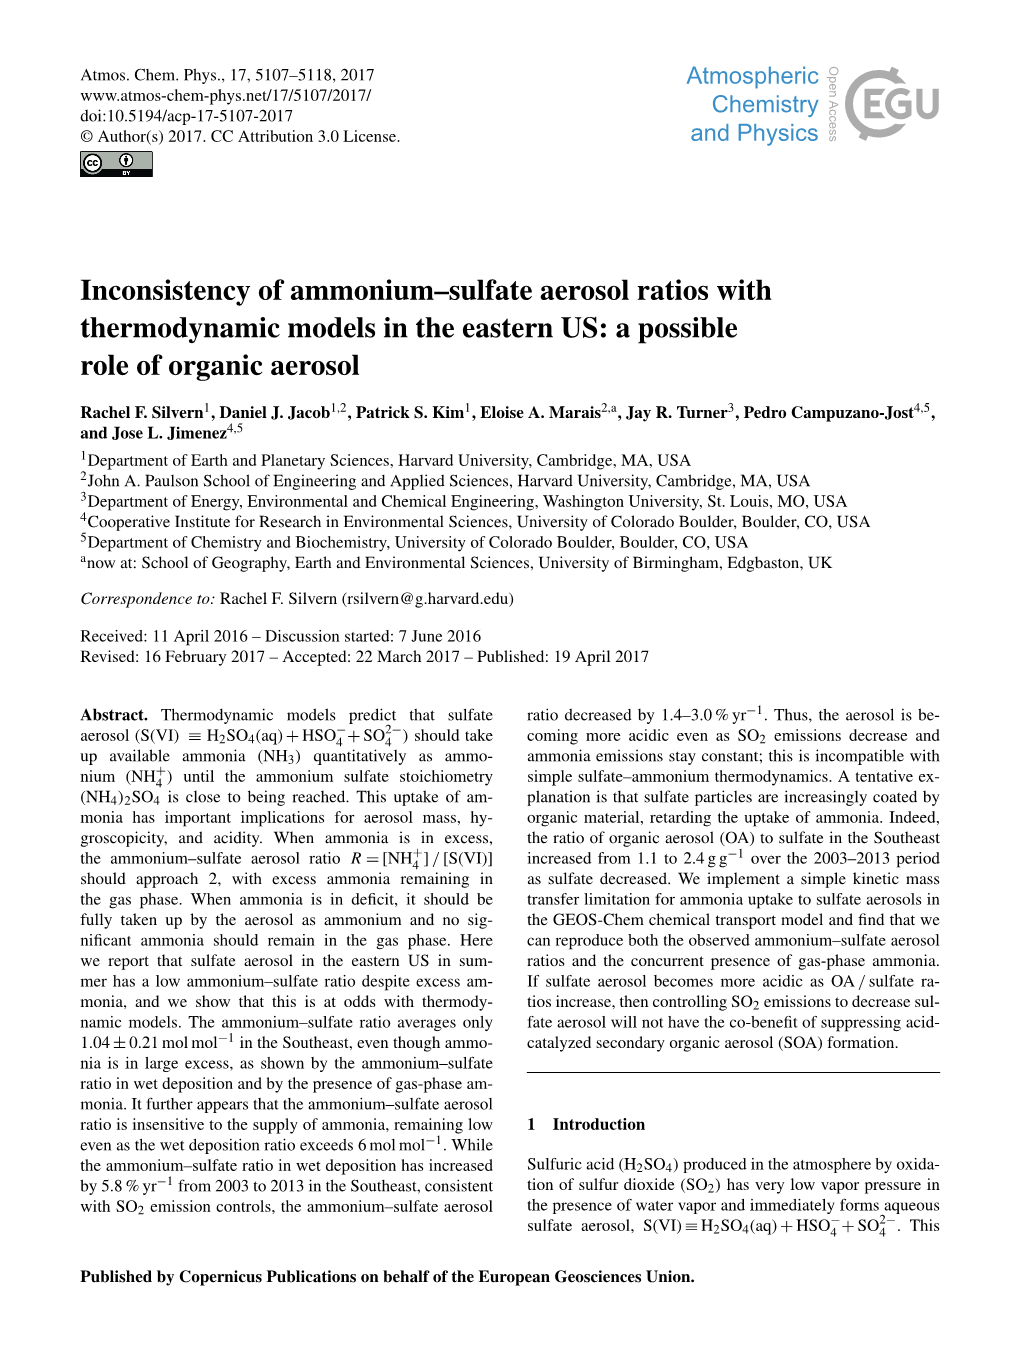 Articles Are Increasingly Coated by Monia Has Important Implications for Aerosol Mass, Hy- Organic Material, Retarding the Uptake of Ammonia